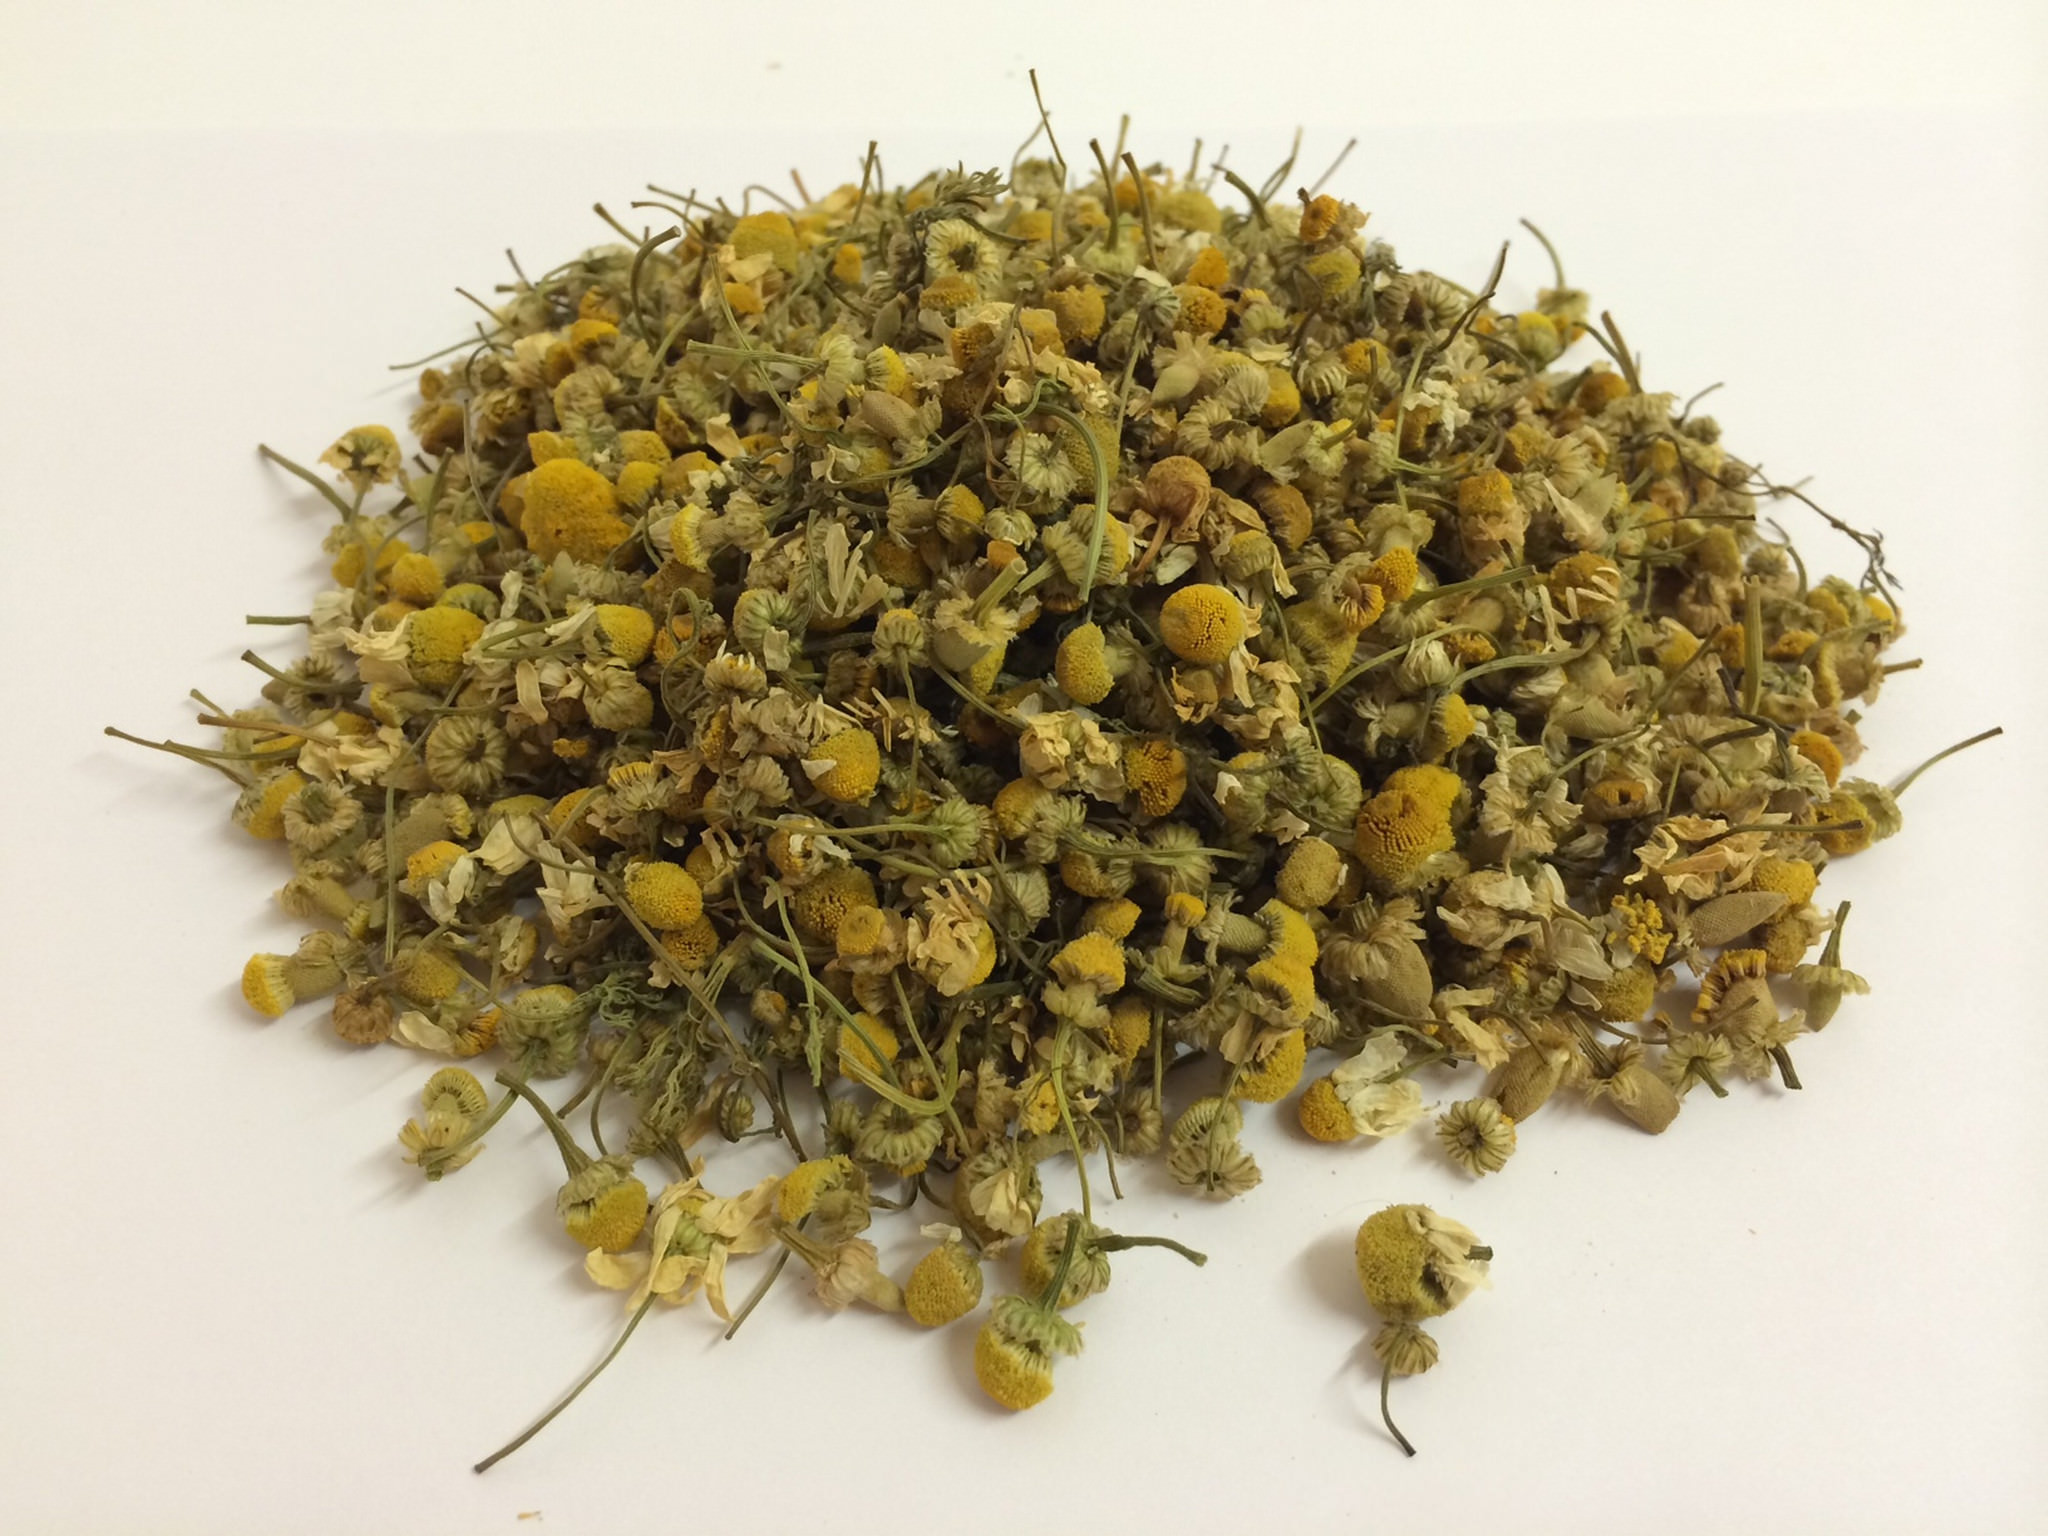 Chamomile/Camomile dried herb flowers - The Spiceworks | Online ...